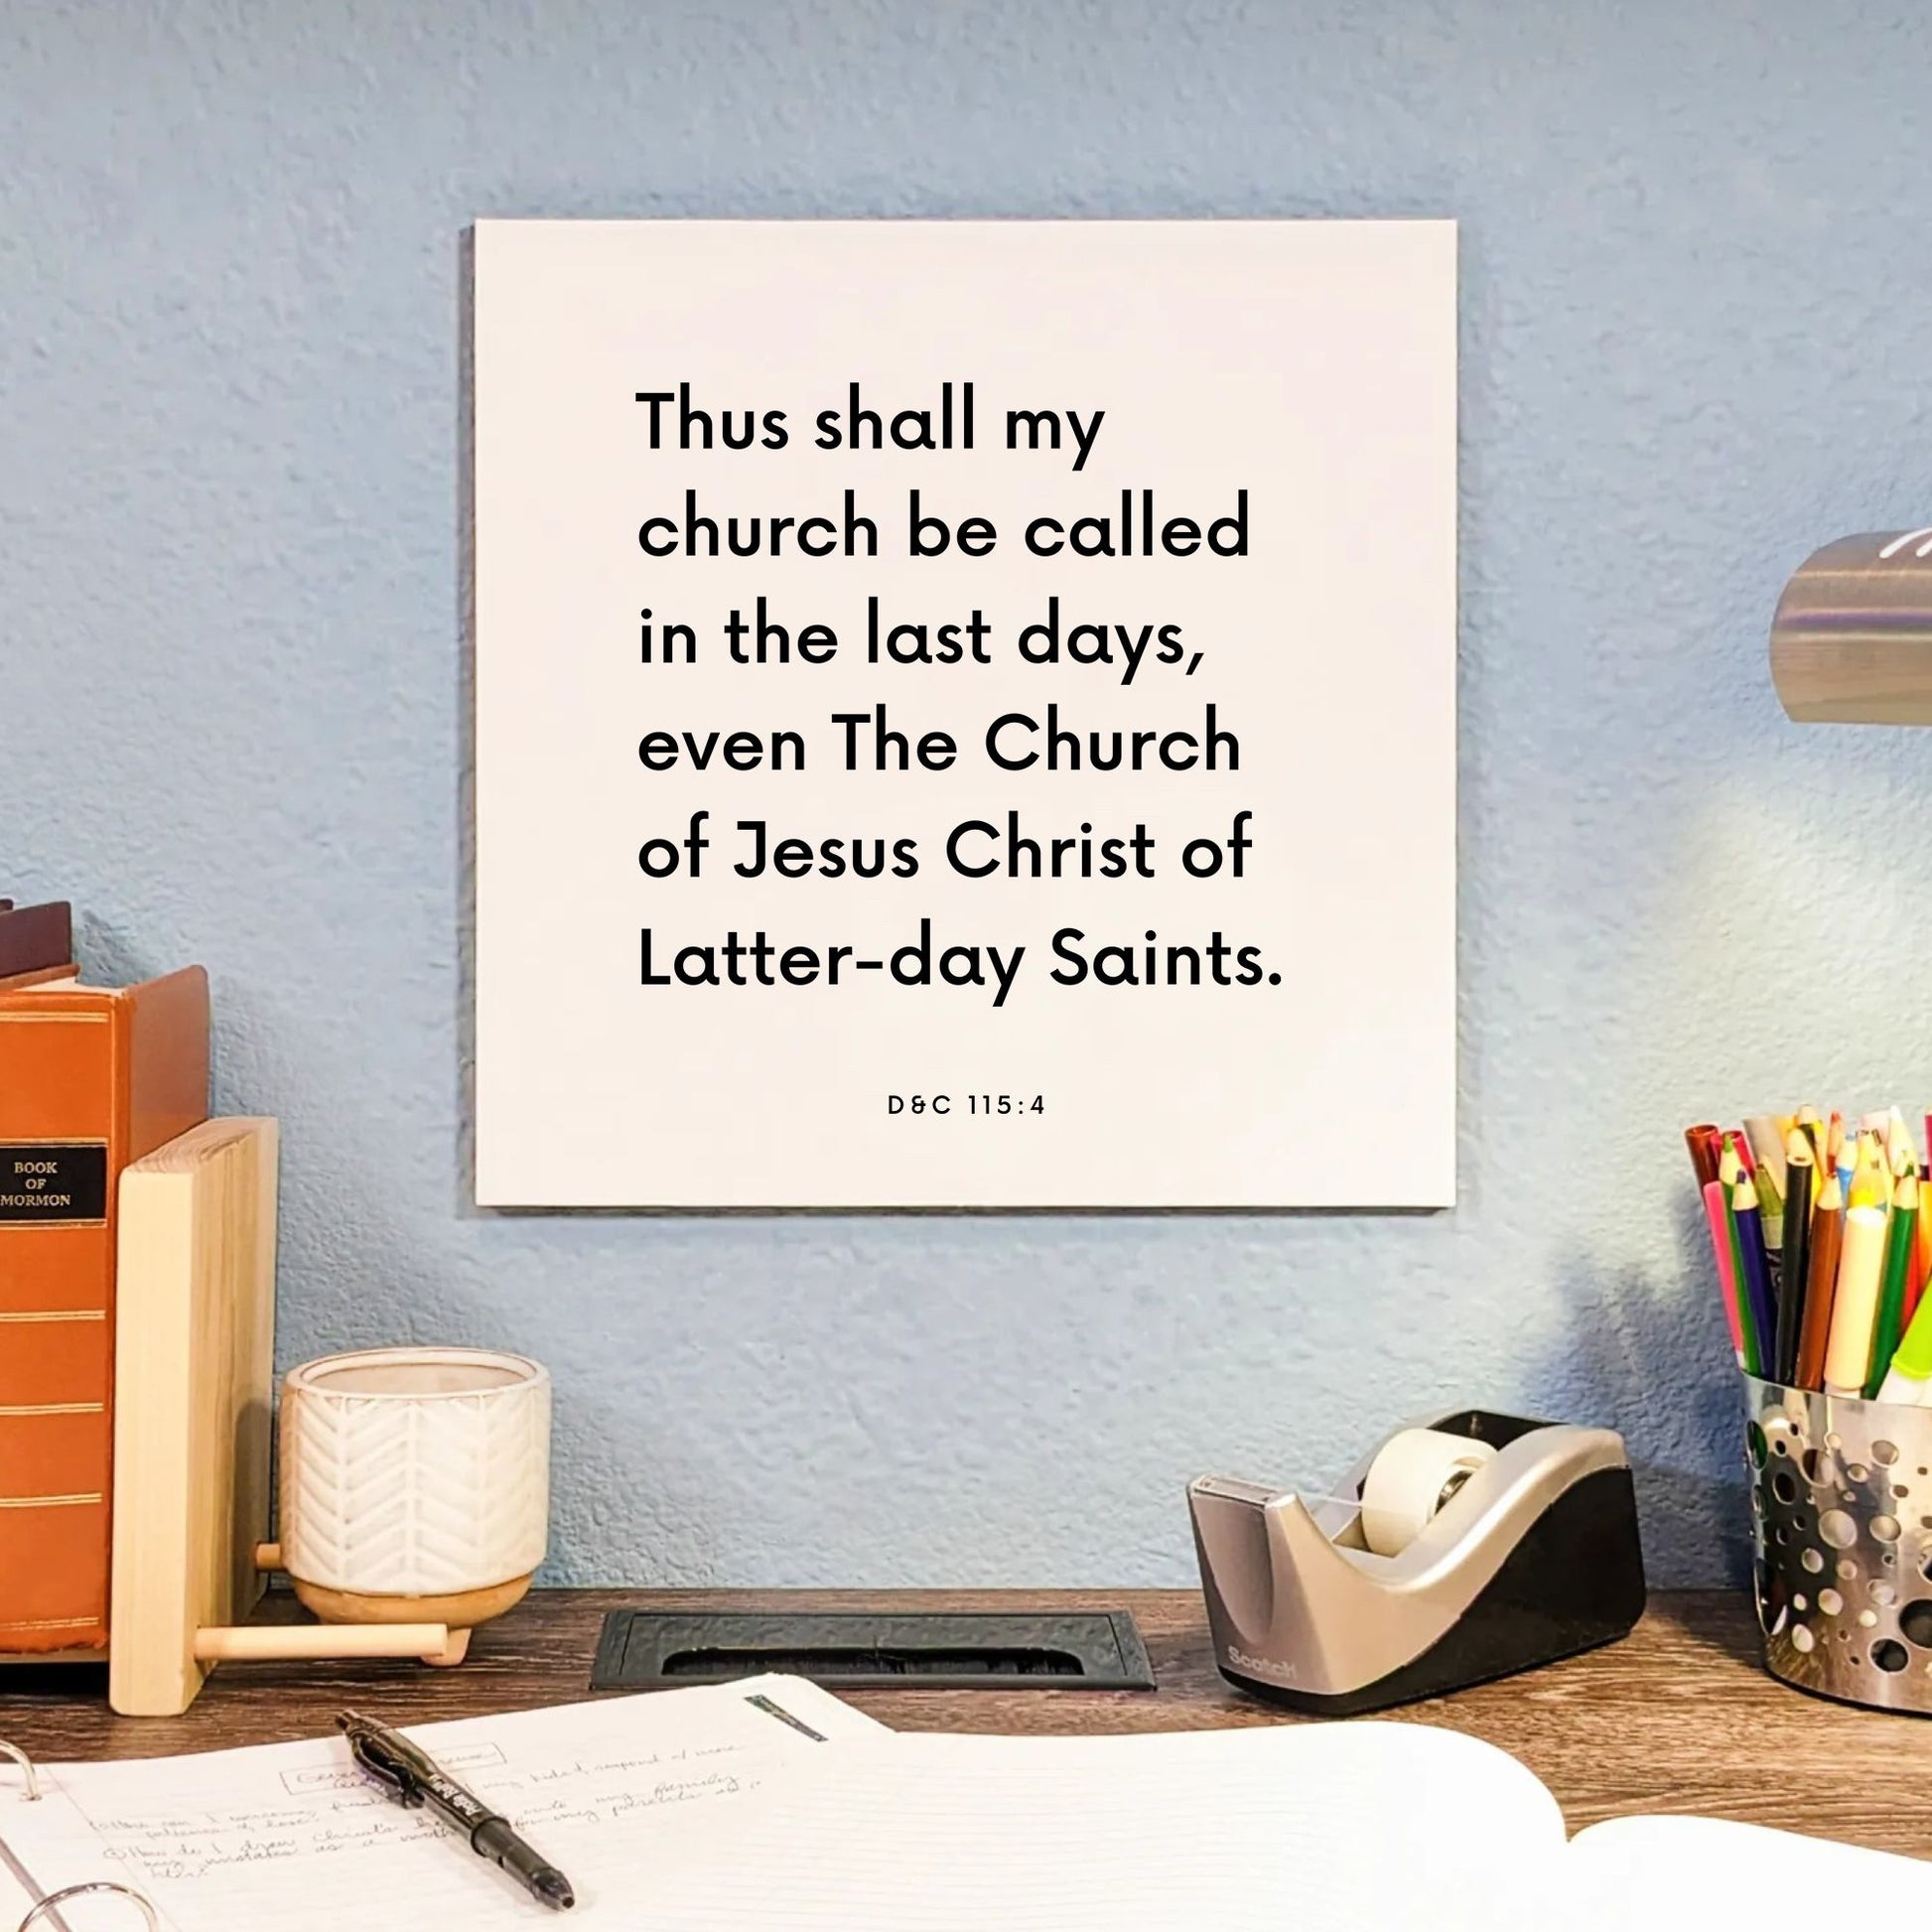 Desk mouting of the scripture tile for D&C 115:4 - "Thus shall my church be called in the last days"